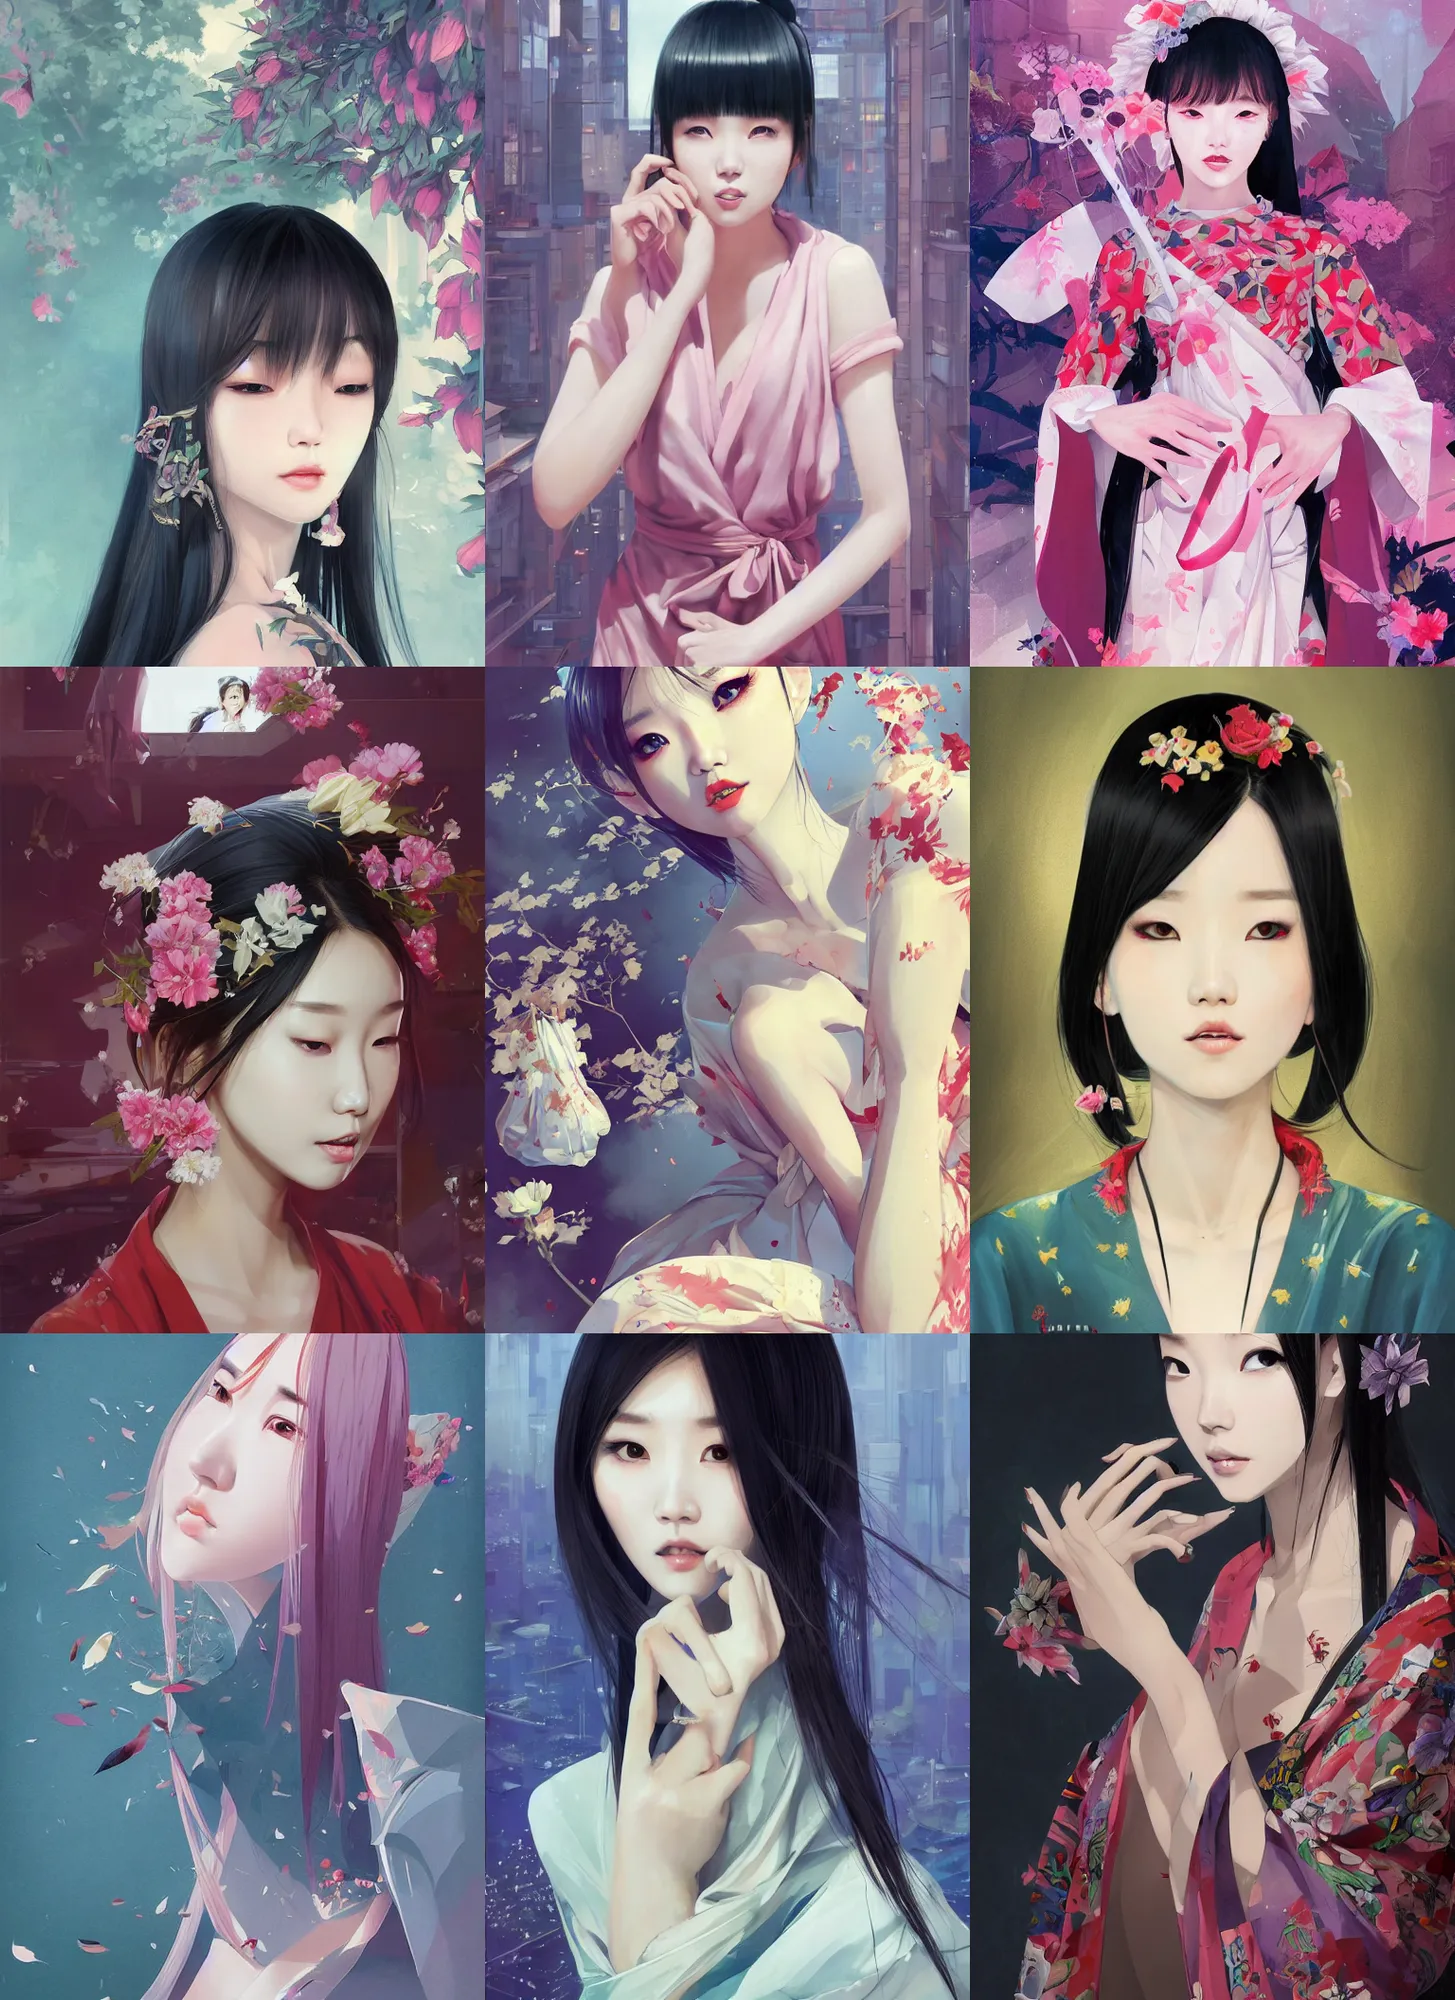 Prompt: sharp hq rendering, reaistic, semirealism, lee ji - eun wearing decorated robes, beautiful, seductive, appealing character, painterly, highly detailed in the style of wlop by ilya kuvshinov, wenjun lin, sakimichan, james jean, andrei riabovitchev, conrad roset, angular asymmetrical design, eastern art style